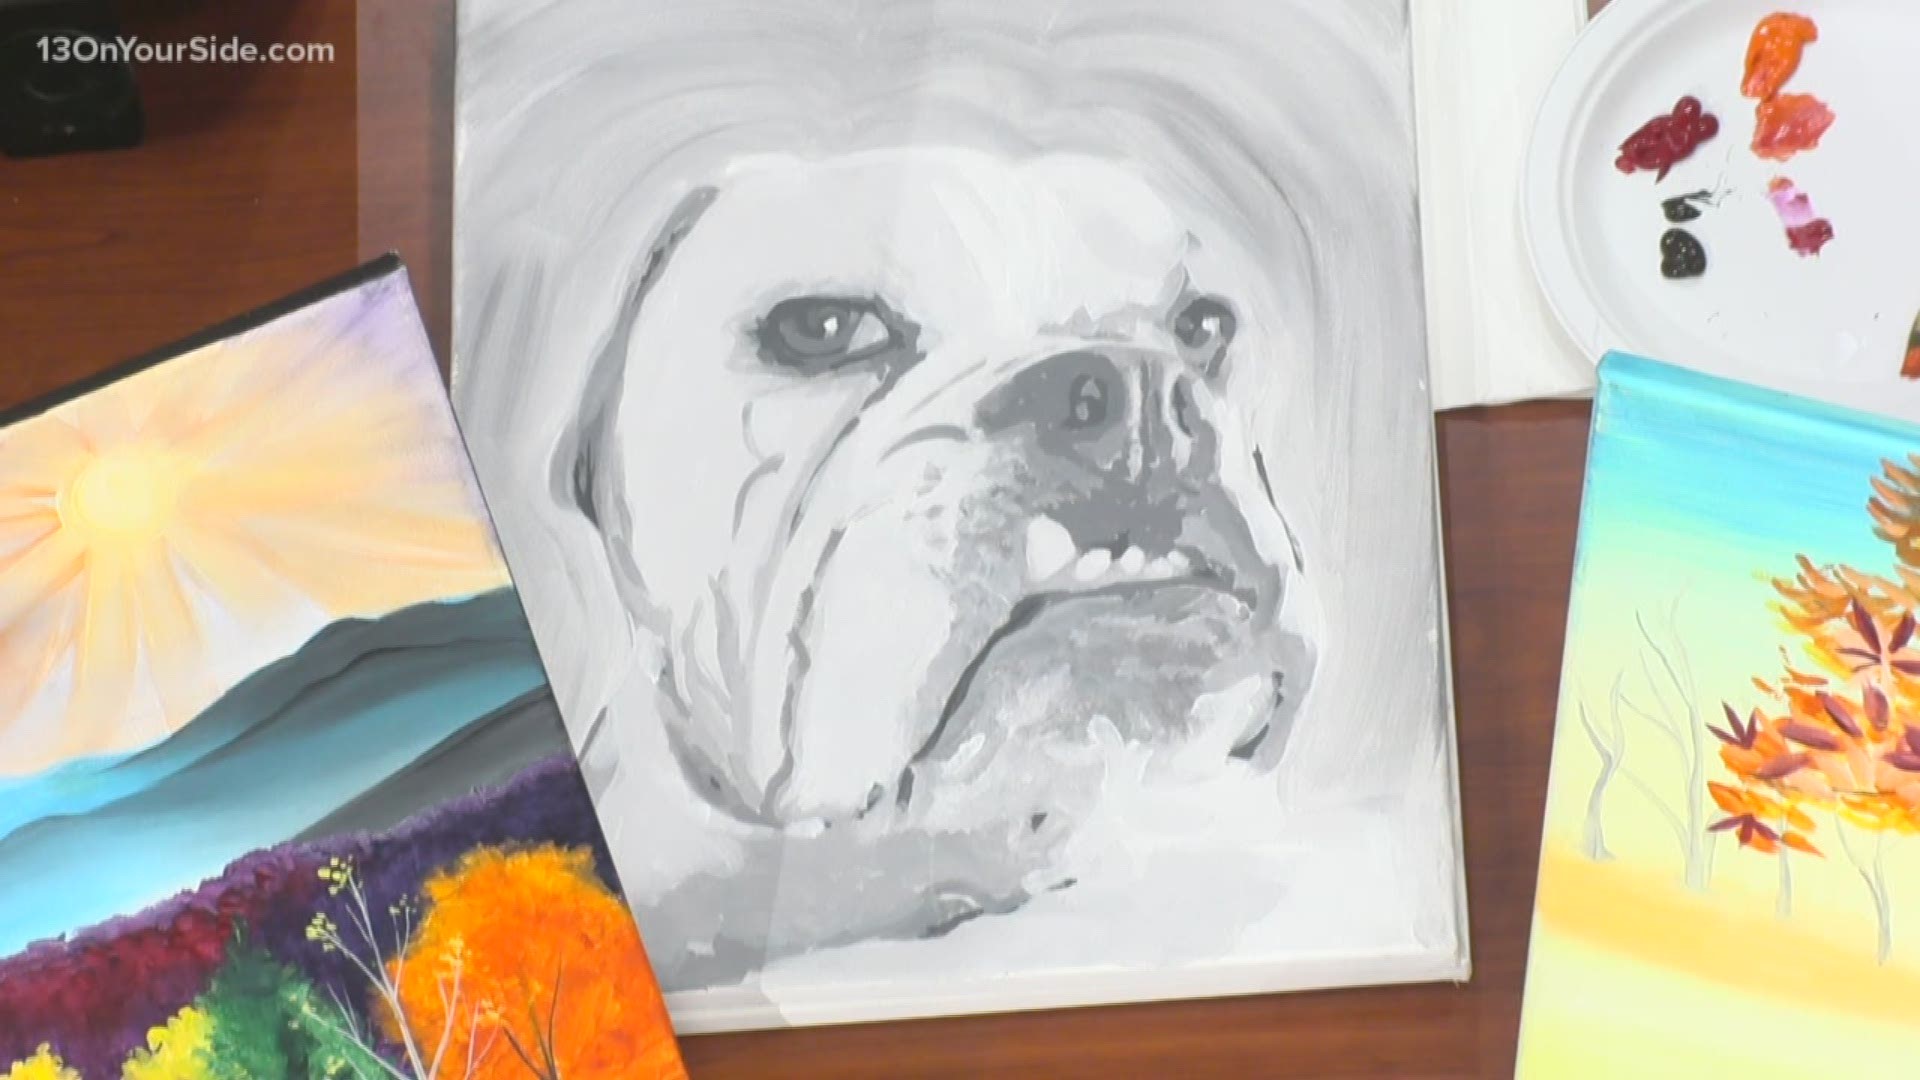 From festive holiday scenes to painting your pet, Wine and Canvas will bring out the artist in you.